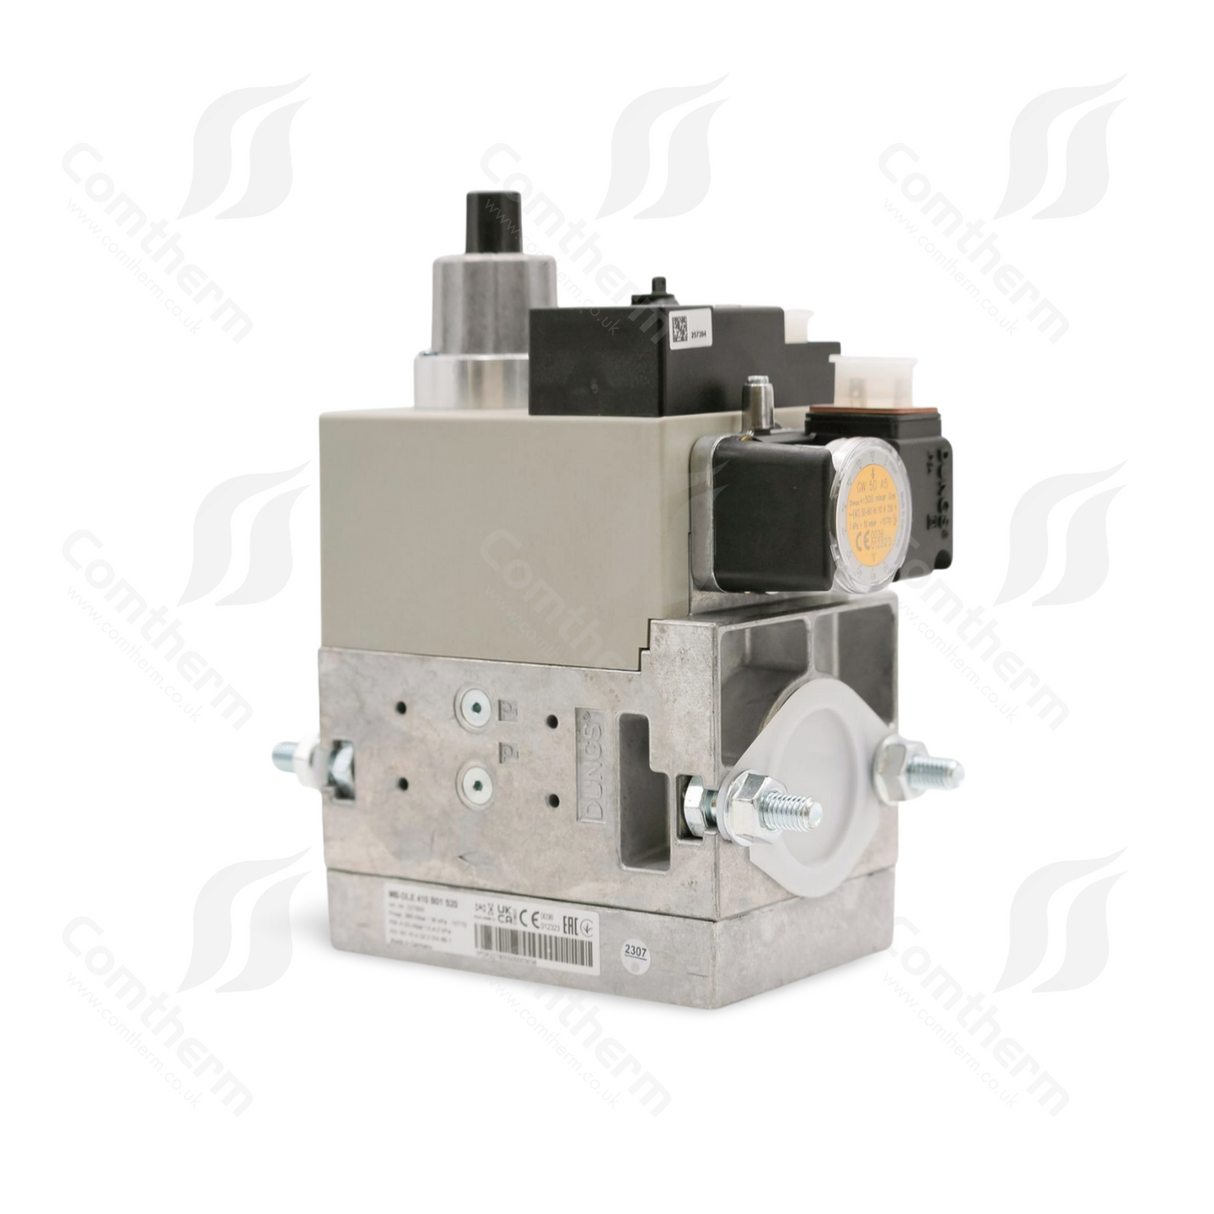 Dungs MB-DLE 410 B01 S20 + GW50A5 Multibloc Gas Valve - 110v